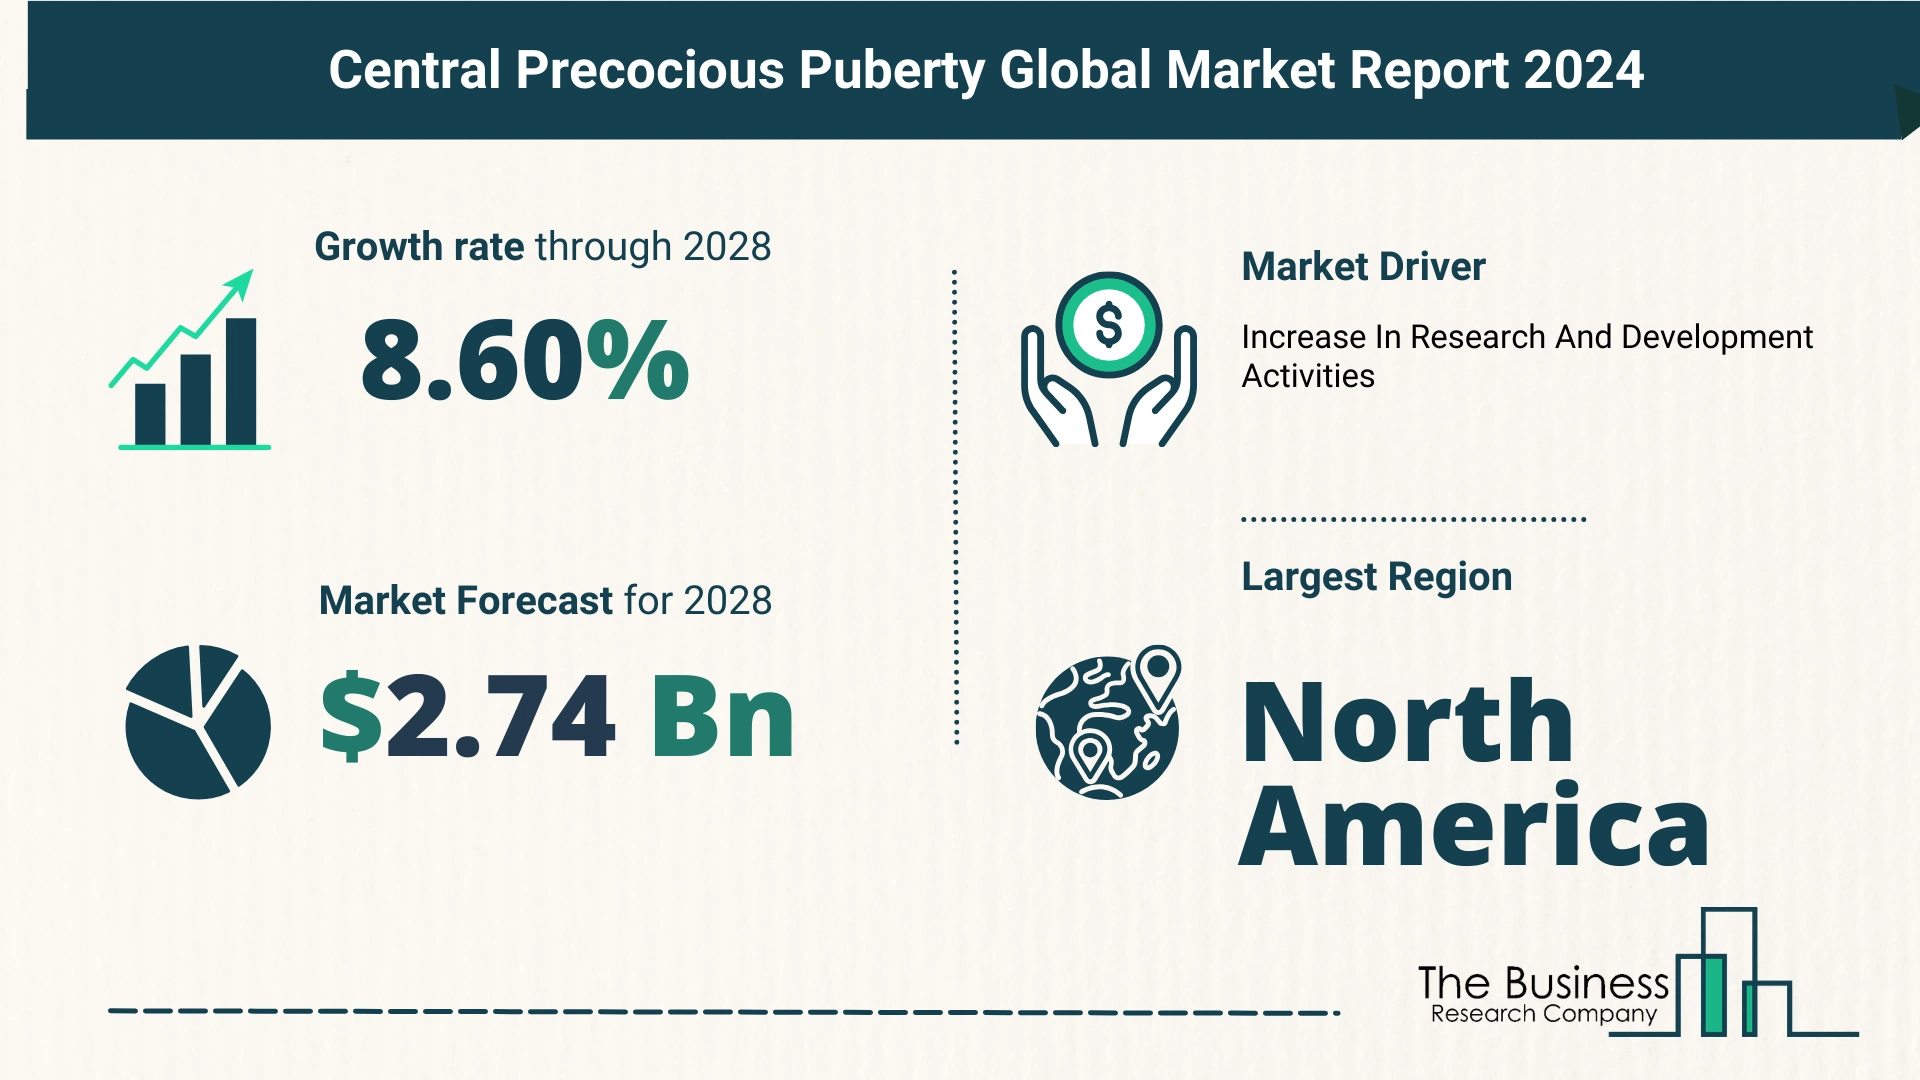 What Is The Forecast Growth Rate For The Central Precocious Puberty Market?